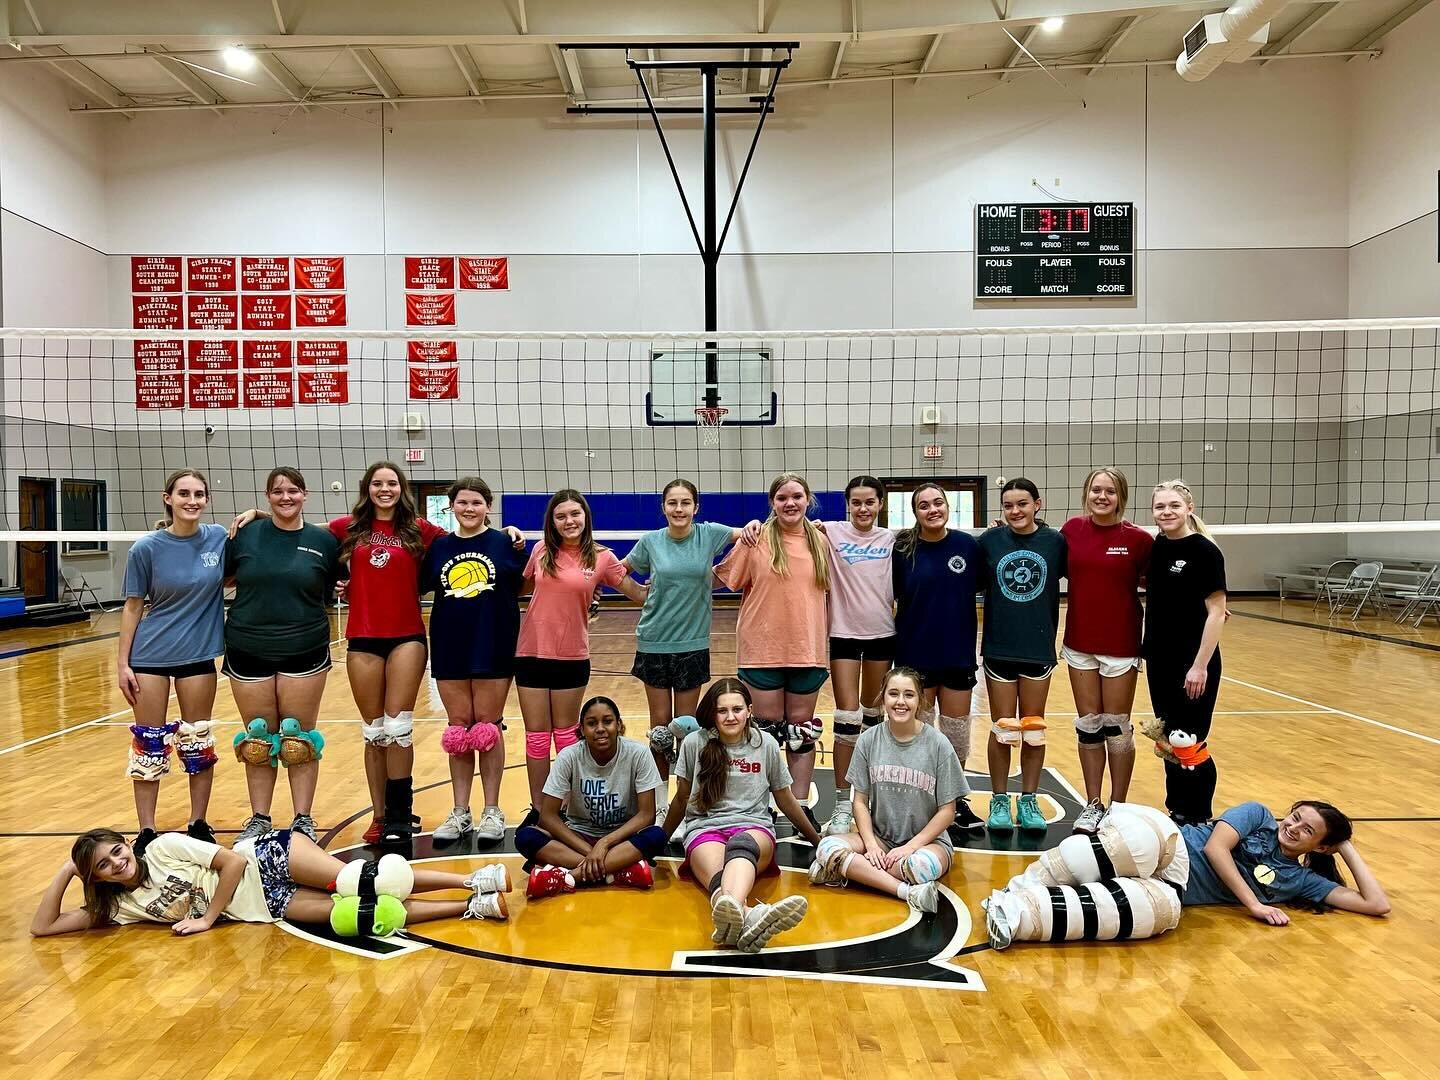 Anything but knee pads practice for these Lady Saints.

Join us Thursday at 5:30pm for our last home game (pink out) and to honor our senior, Harleigh Dearth. MS goes to state this weekend!! Let&rsquo;s cheer them on!

#webynetogerher #BCSvolleyball 